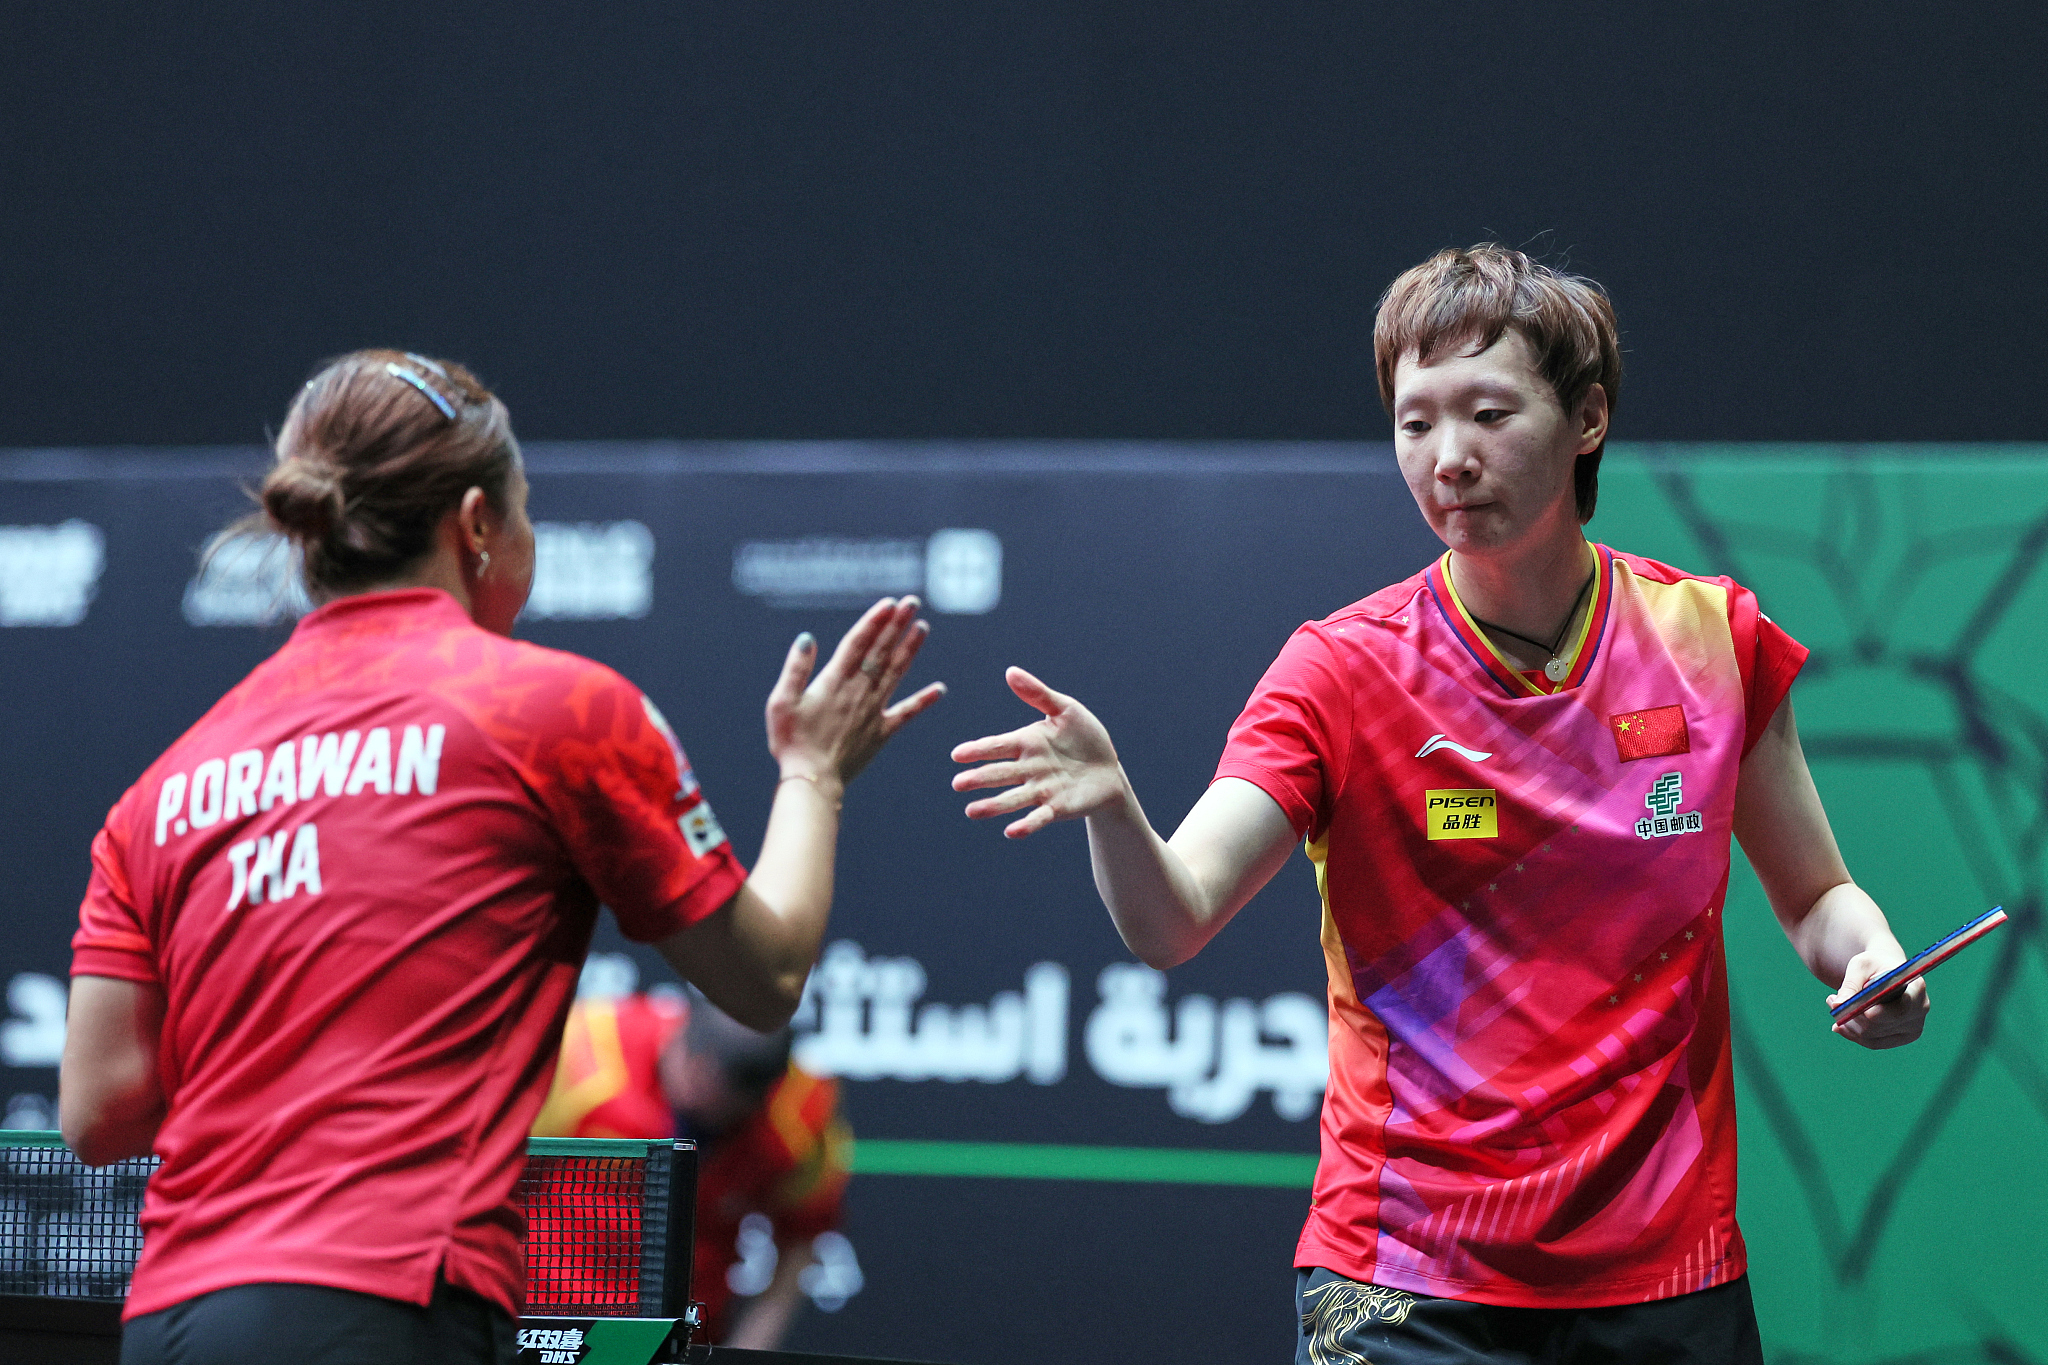 Wang Manyu (R) of China and Orawan Paranang of Thailand greet each other after their women's singles match during the WTT Saudi Smash in Jeddah, Saudi Arabia, May 4, 2024. /CFP